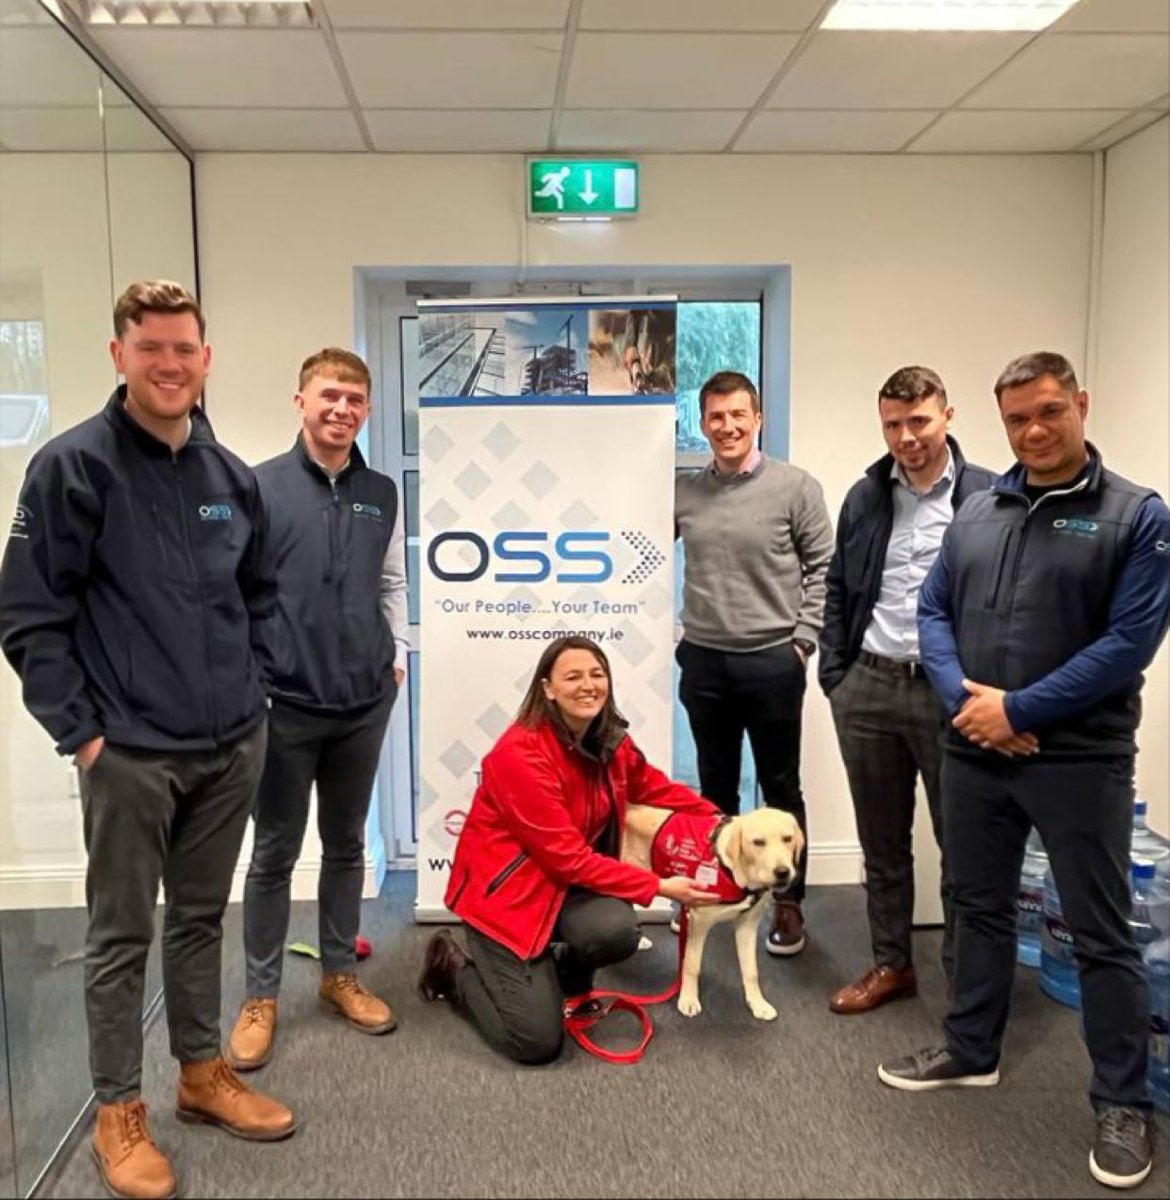 Earlier this week... Pup in training Hero 🐕‍🦺 got to meet our wonderful charity partners @ossjobs who are sponsoring Hero's journey from pup to a superhero Assistance Dog ⚡ Many thanks to everyone at OSS for your support!